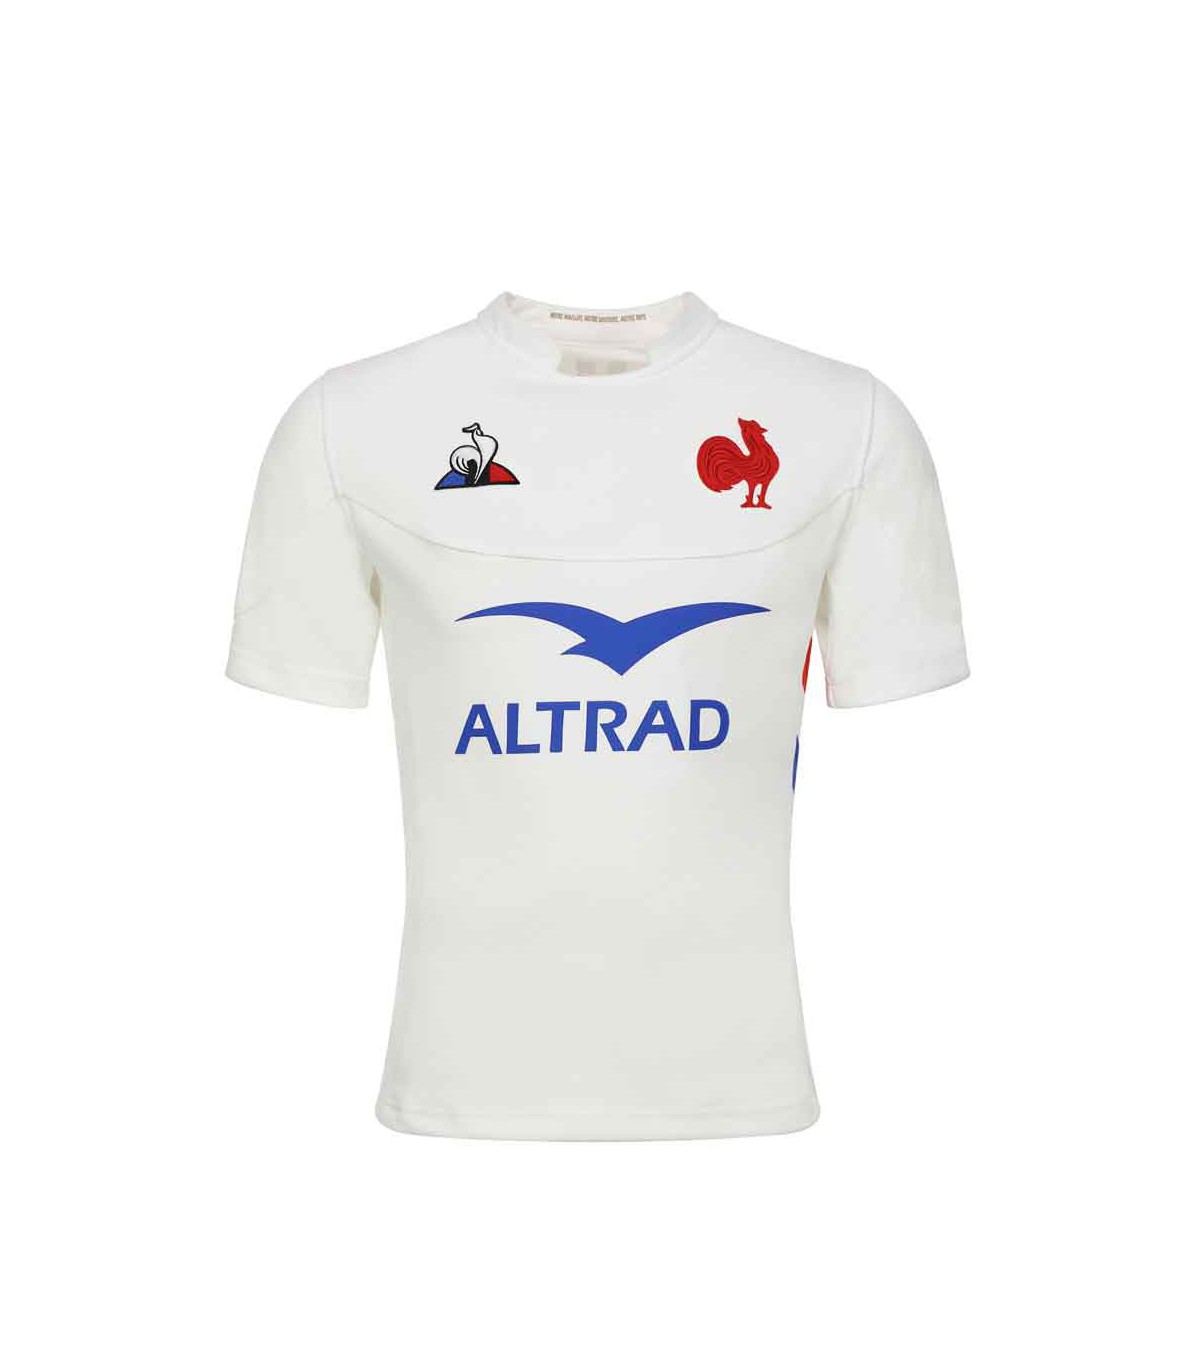 Maillot de rugby Homme Le coq sportif FFR XV MAILLOT REPLICA SS